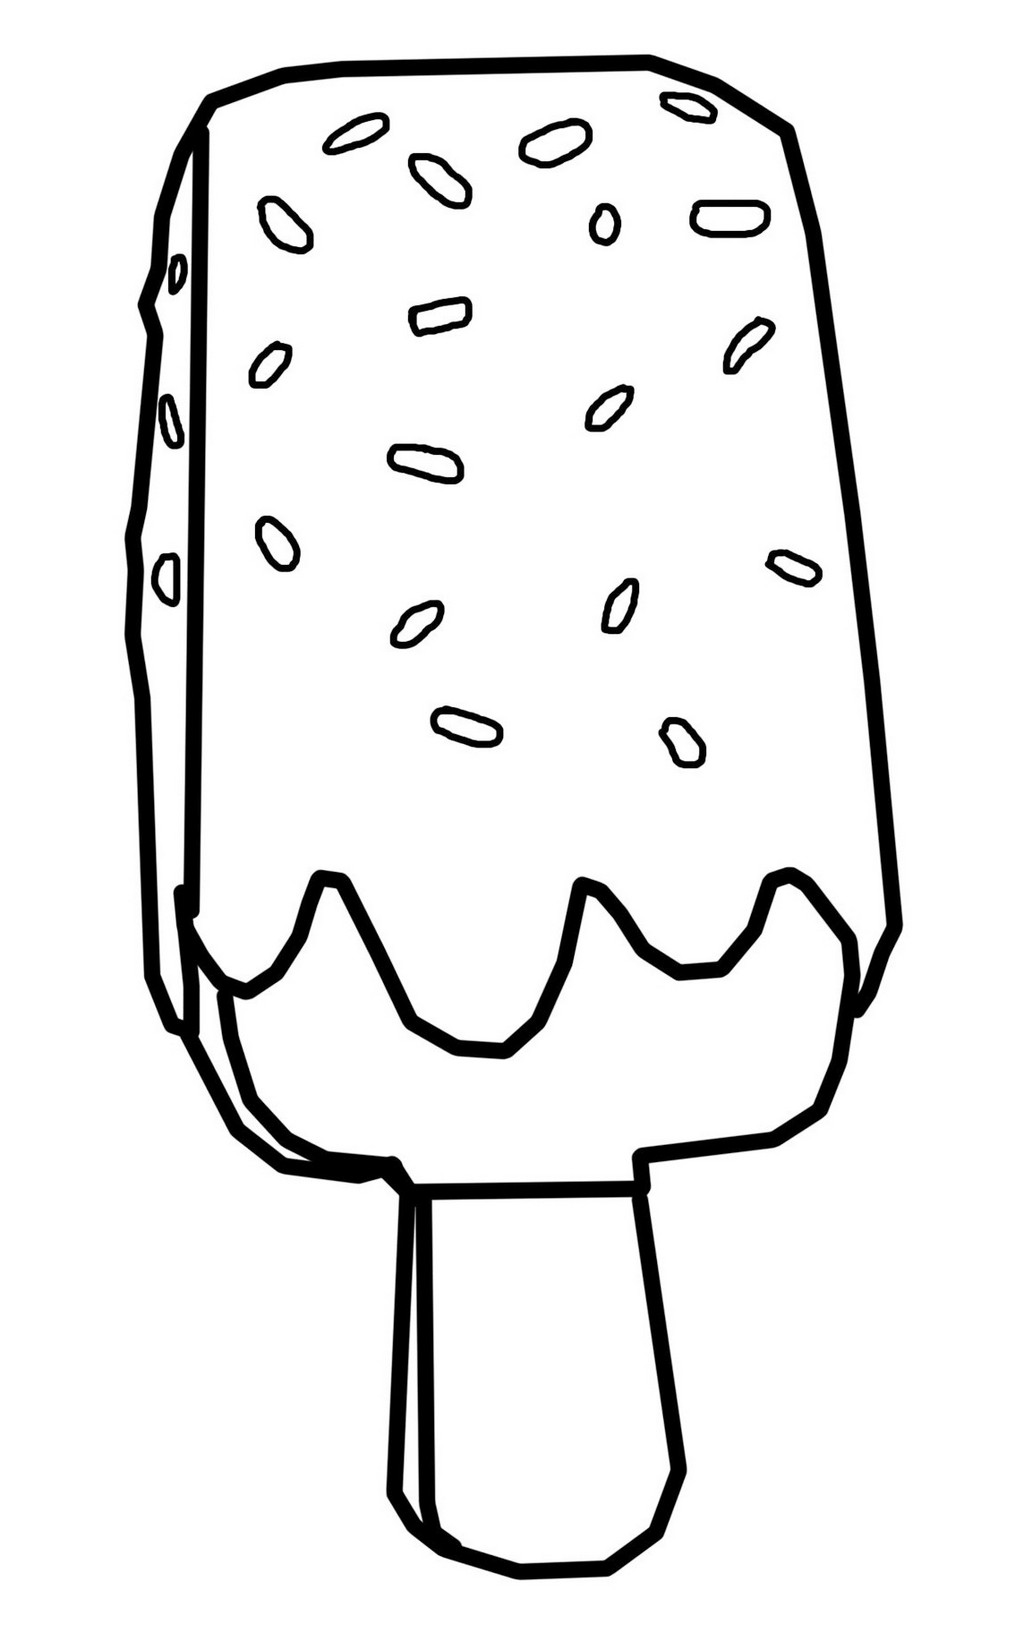 Favorite Popsicle Coloring Pages for Your Little One - Coloring Pages